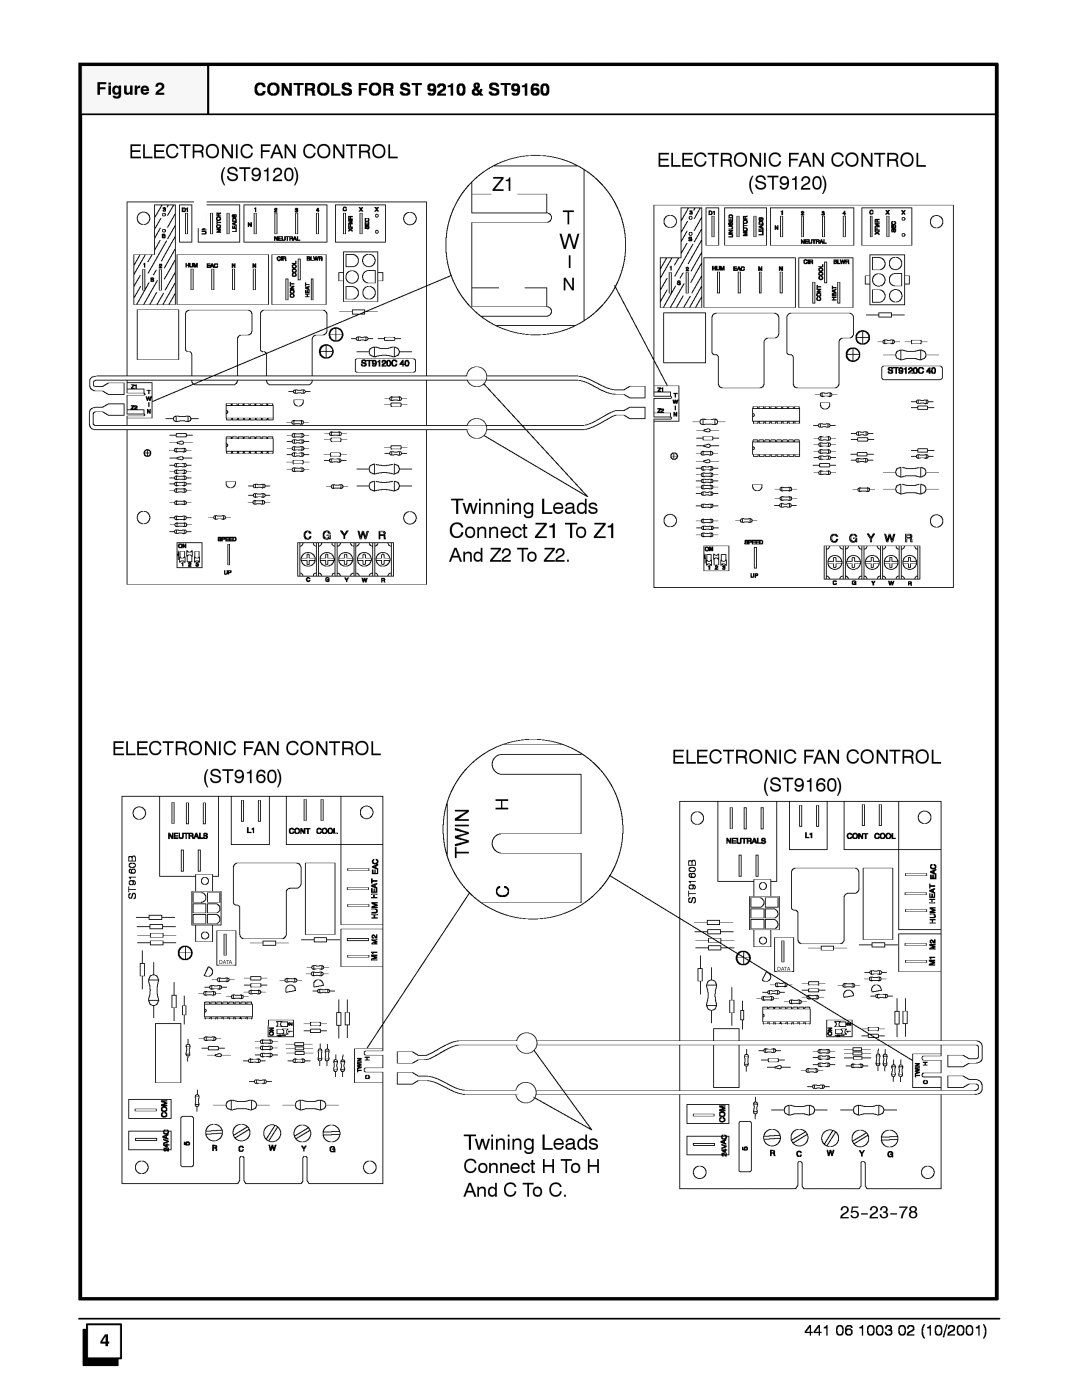 Bryant NAHA003WK.01 installation instructions Twinning Leads, Connect Z1 To Z1, Twining Leads 